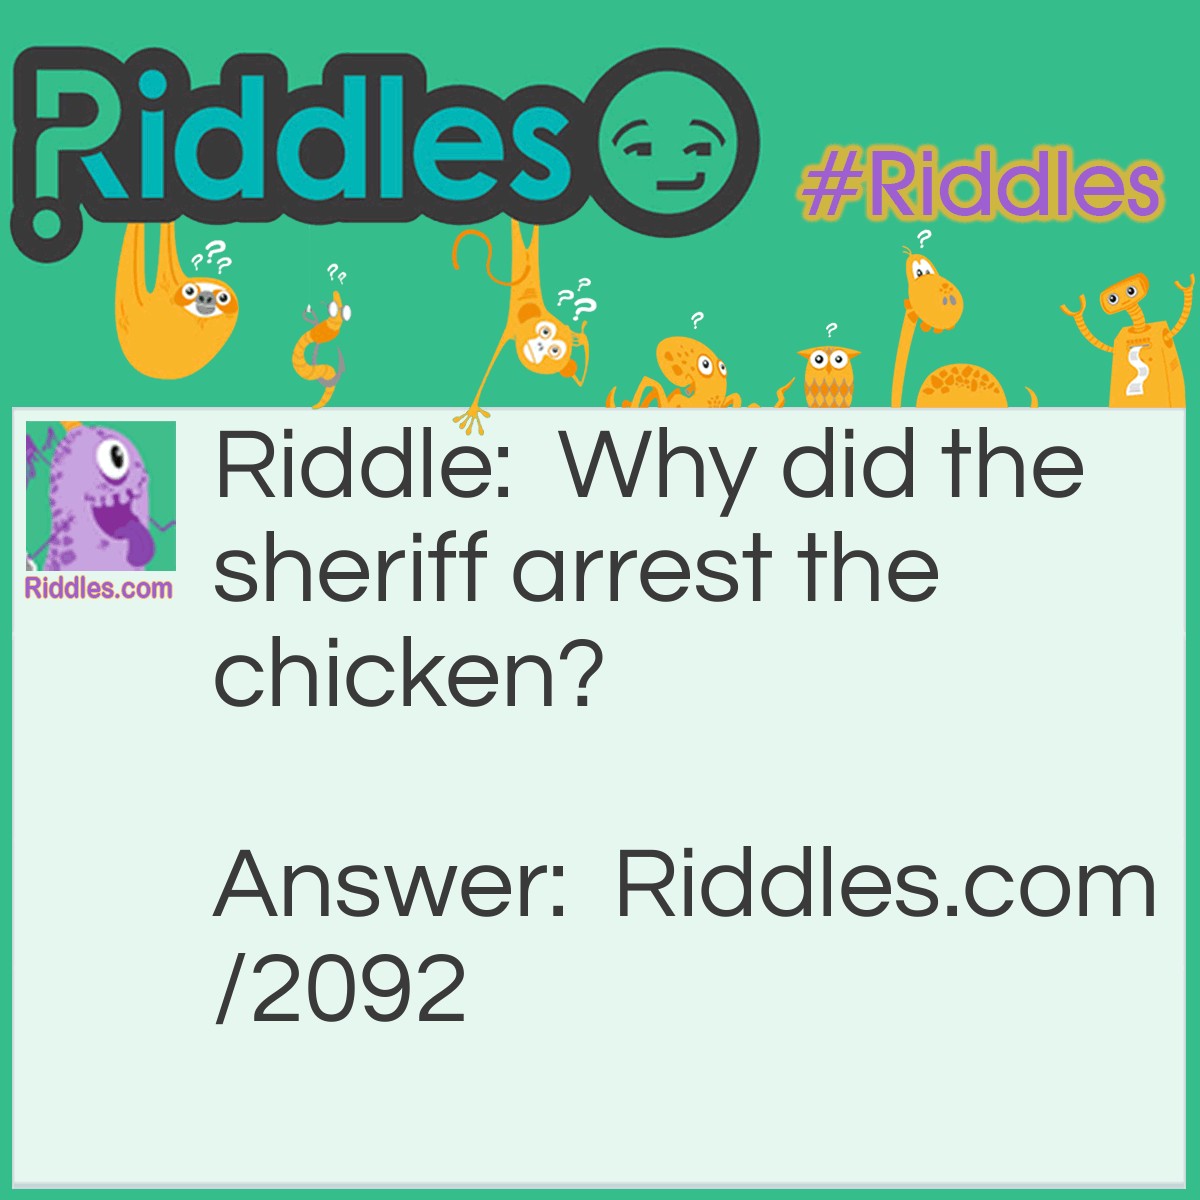 Riddle: Why did the sheriff arrest the chicken? Answer: It used fowl language.